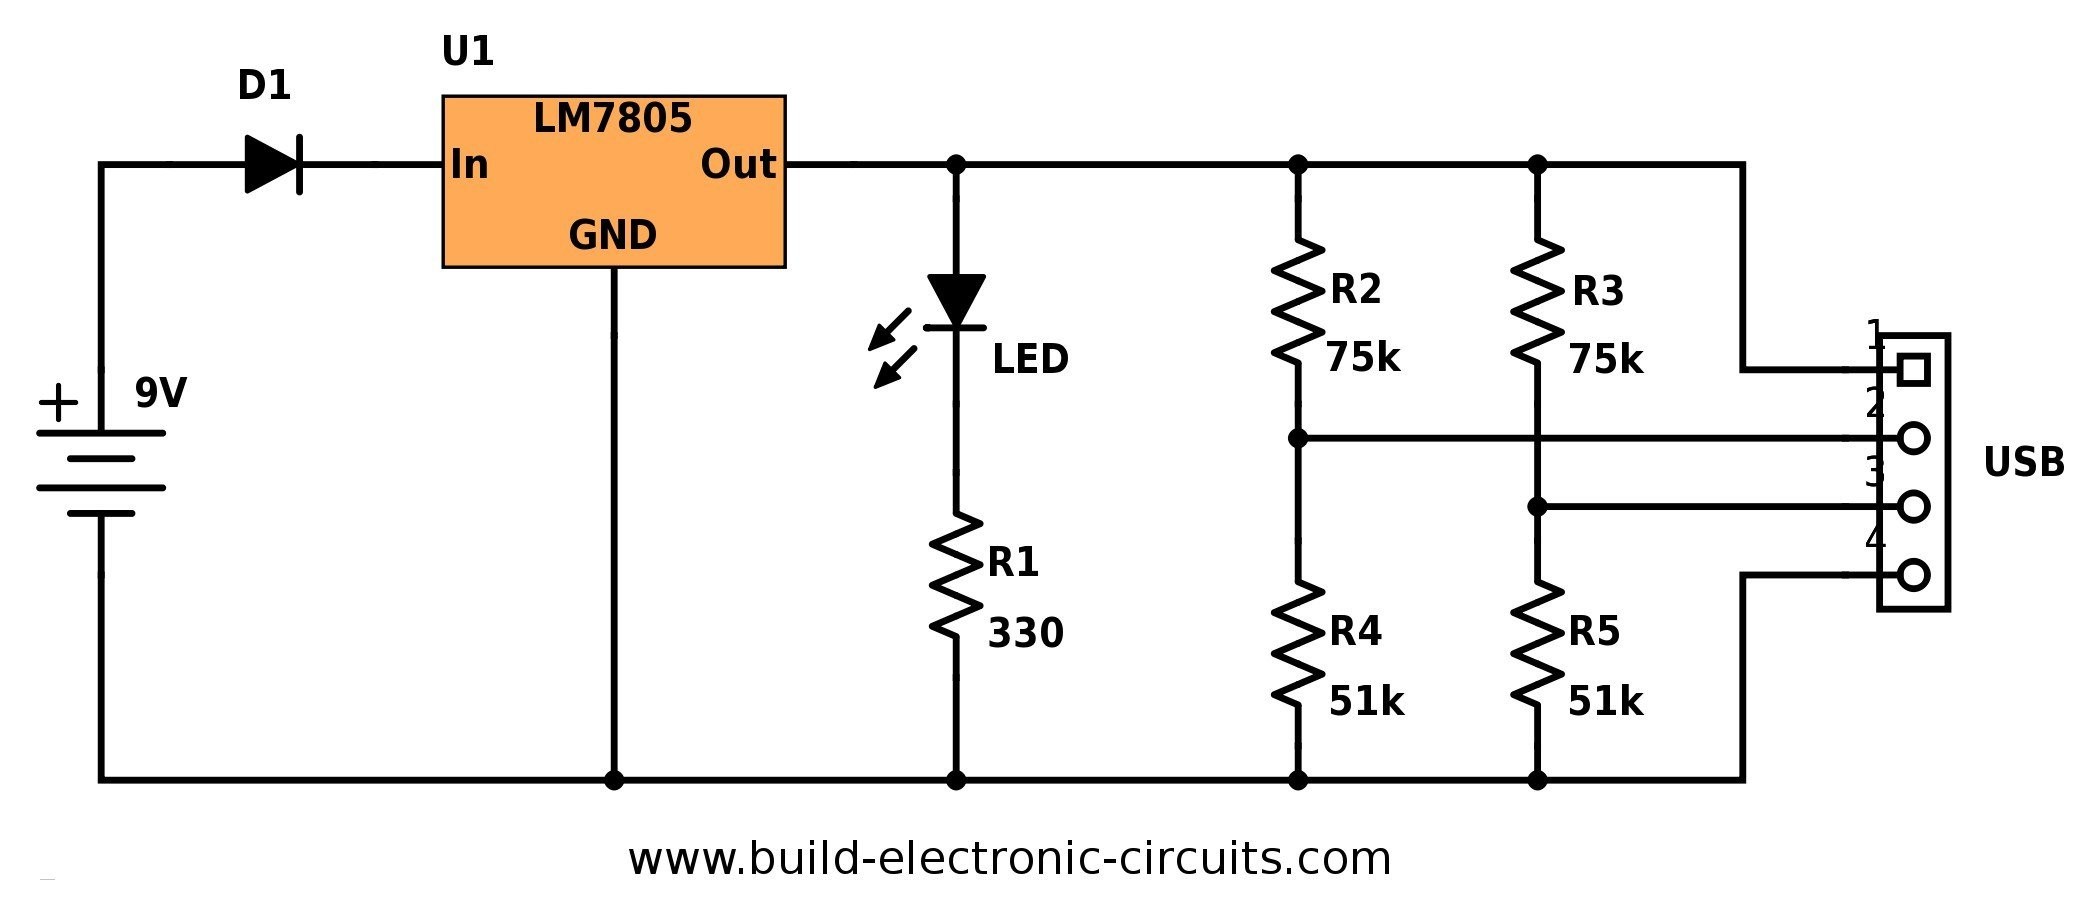 Labelled Circuit Diagram Luxury Labelled Circuit Diagram Download Cell Phone Charger Circuit Diagram Labelled Circuit